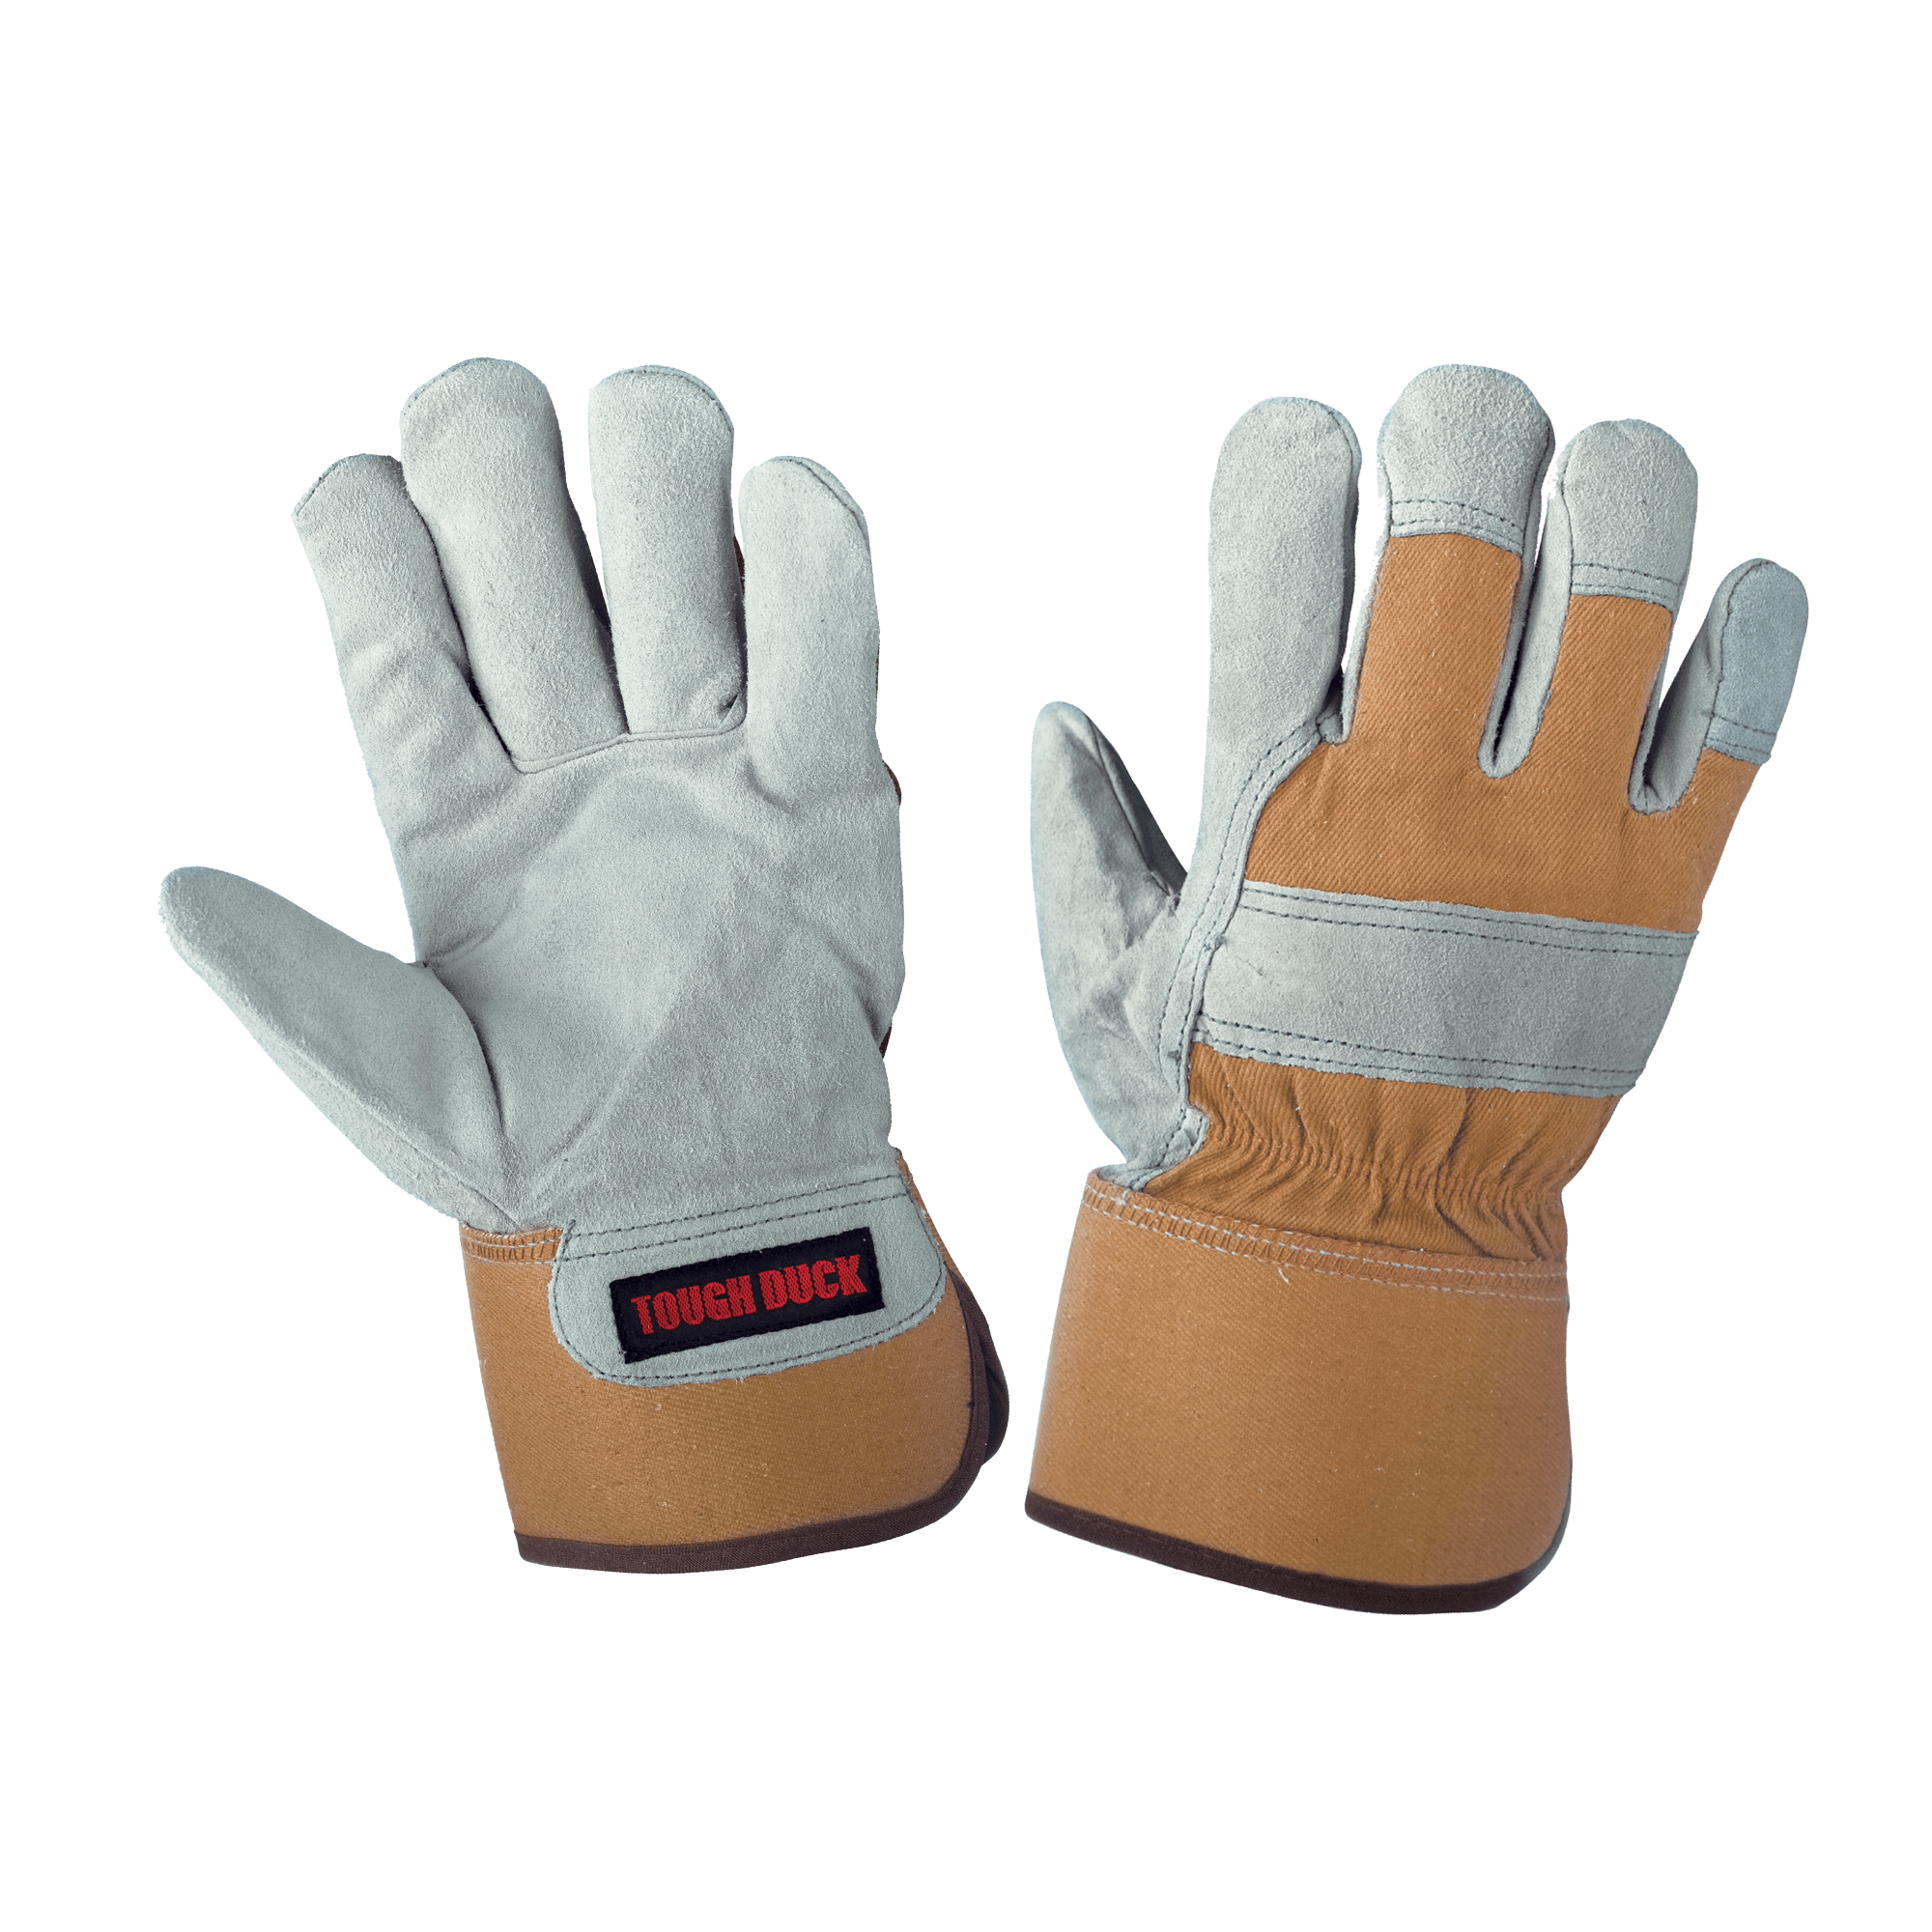 Tough Duck Pile Lined Split Leather Winter Work Gloves | M-2XL Work Gloves and Hats - Cleanflow